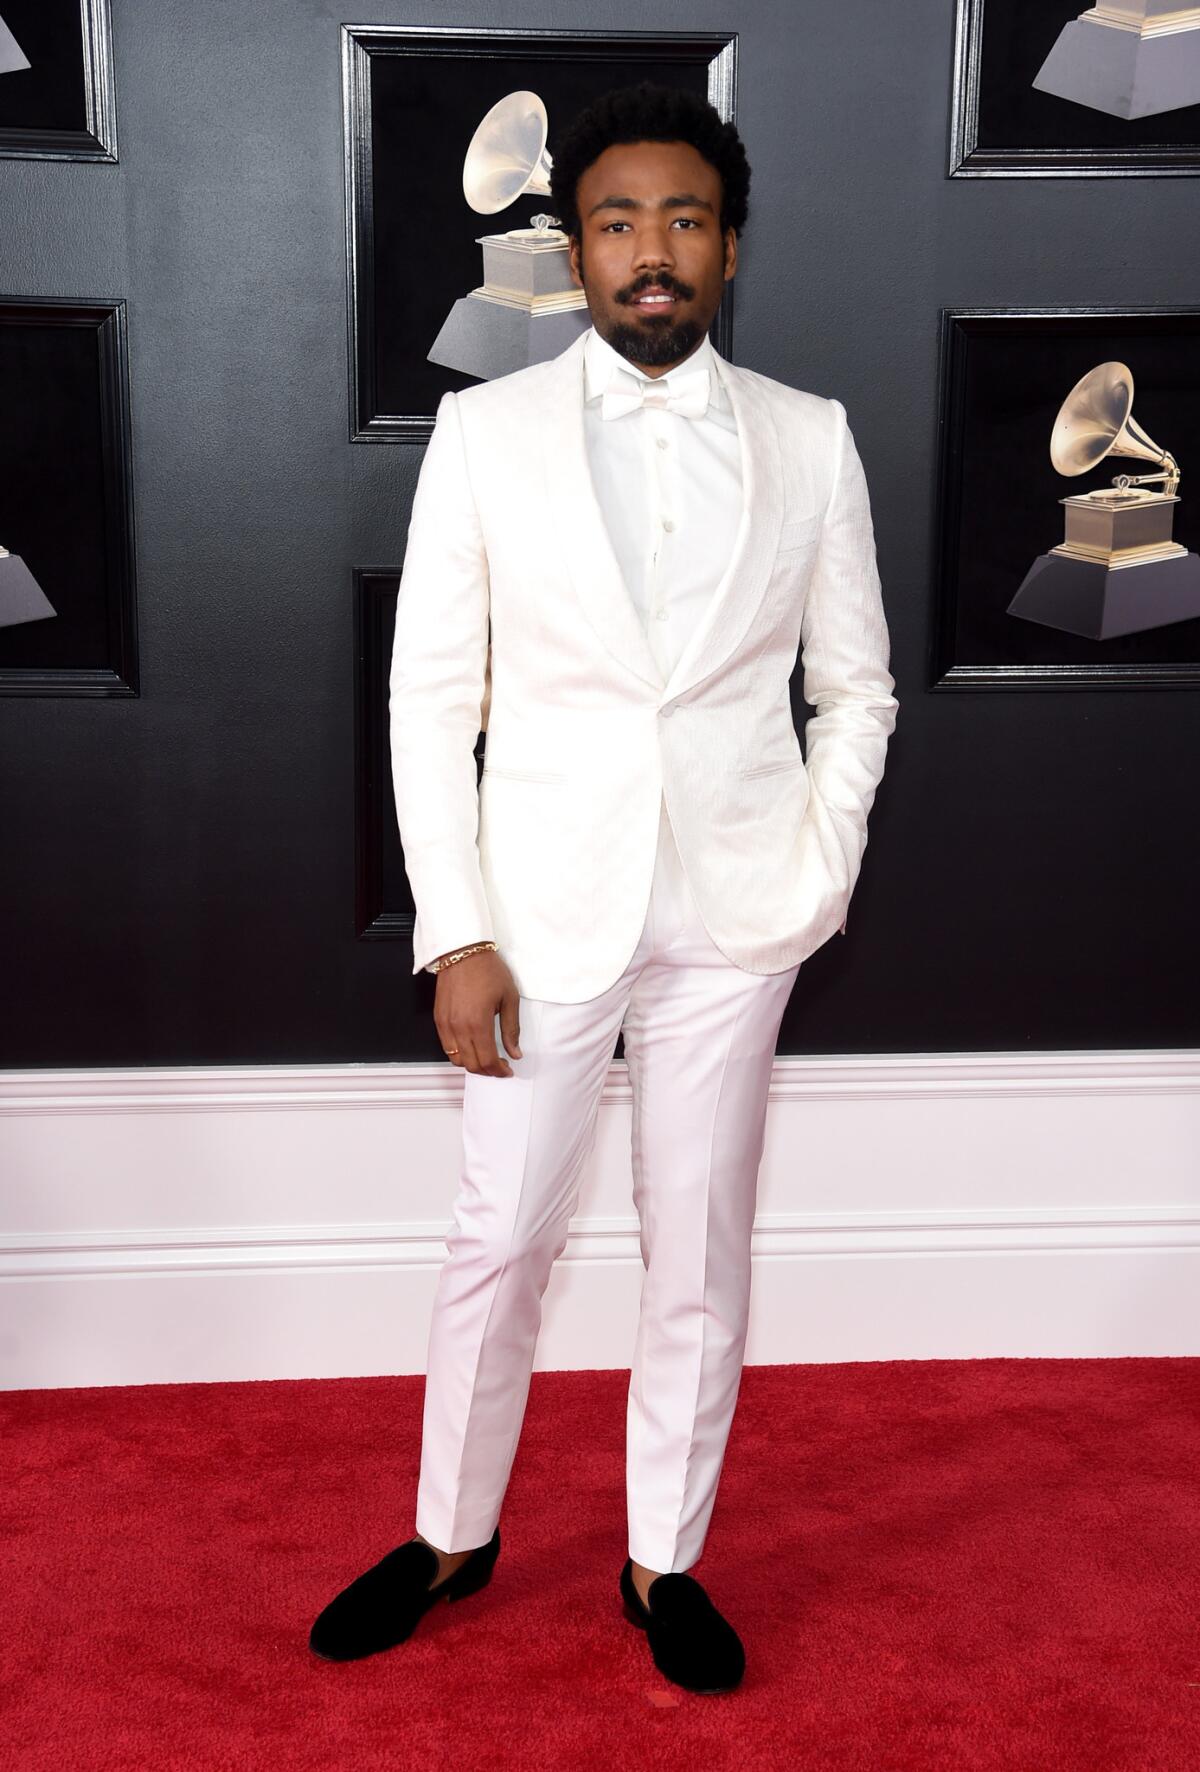 Actor and Grammy winner Donald Glover, a.k.a. Childish Gambino, dressed in all-white Ermenegildo Zegna Couture tuxedo on the Grammy Awards red carpet in New York in January.